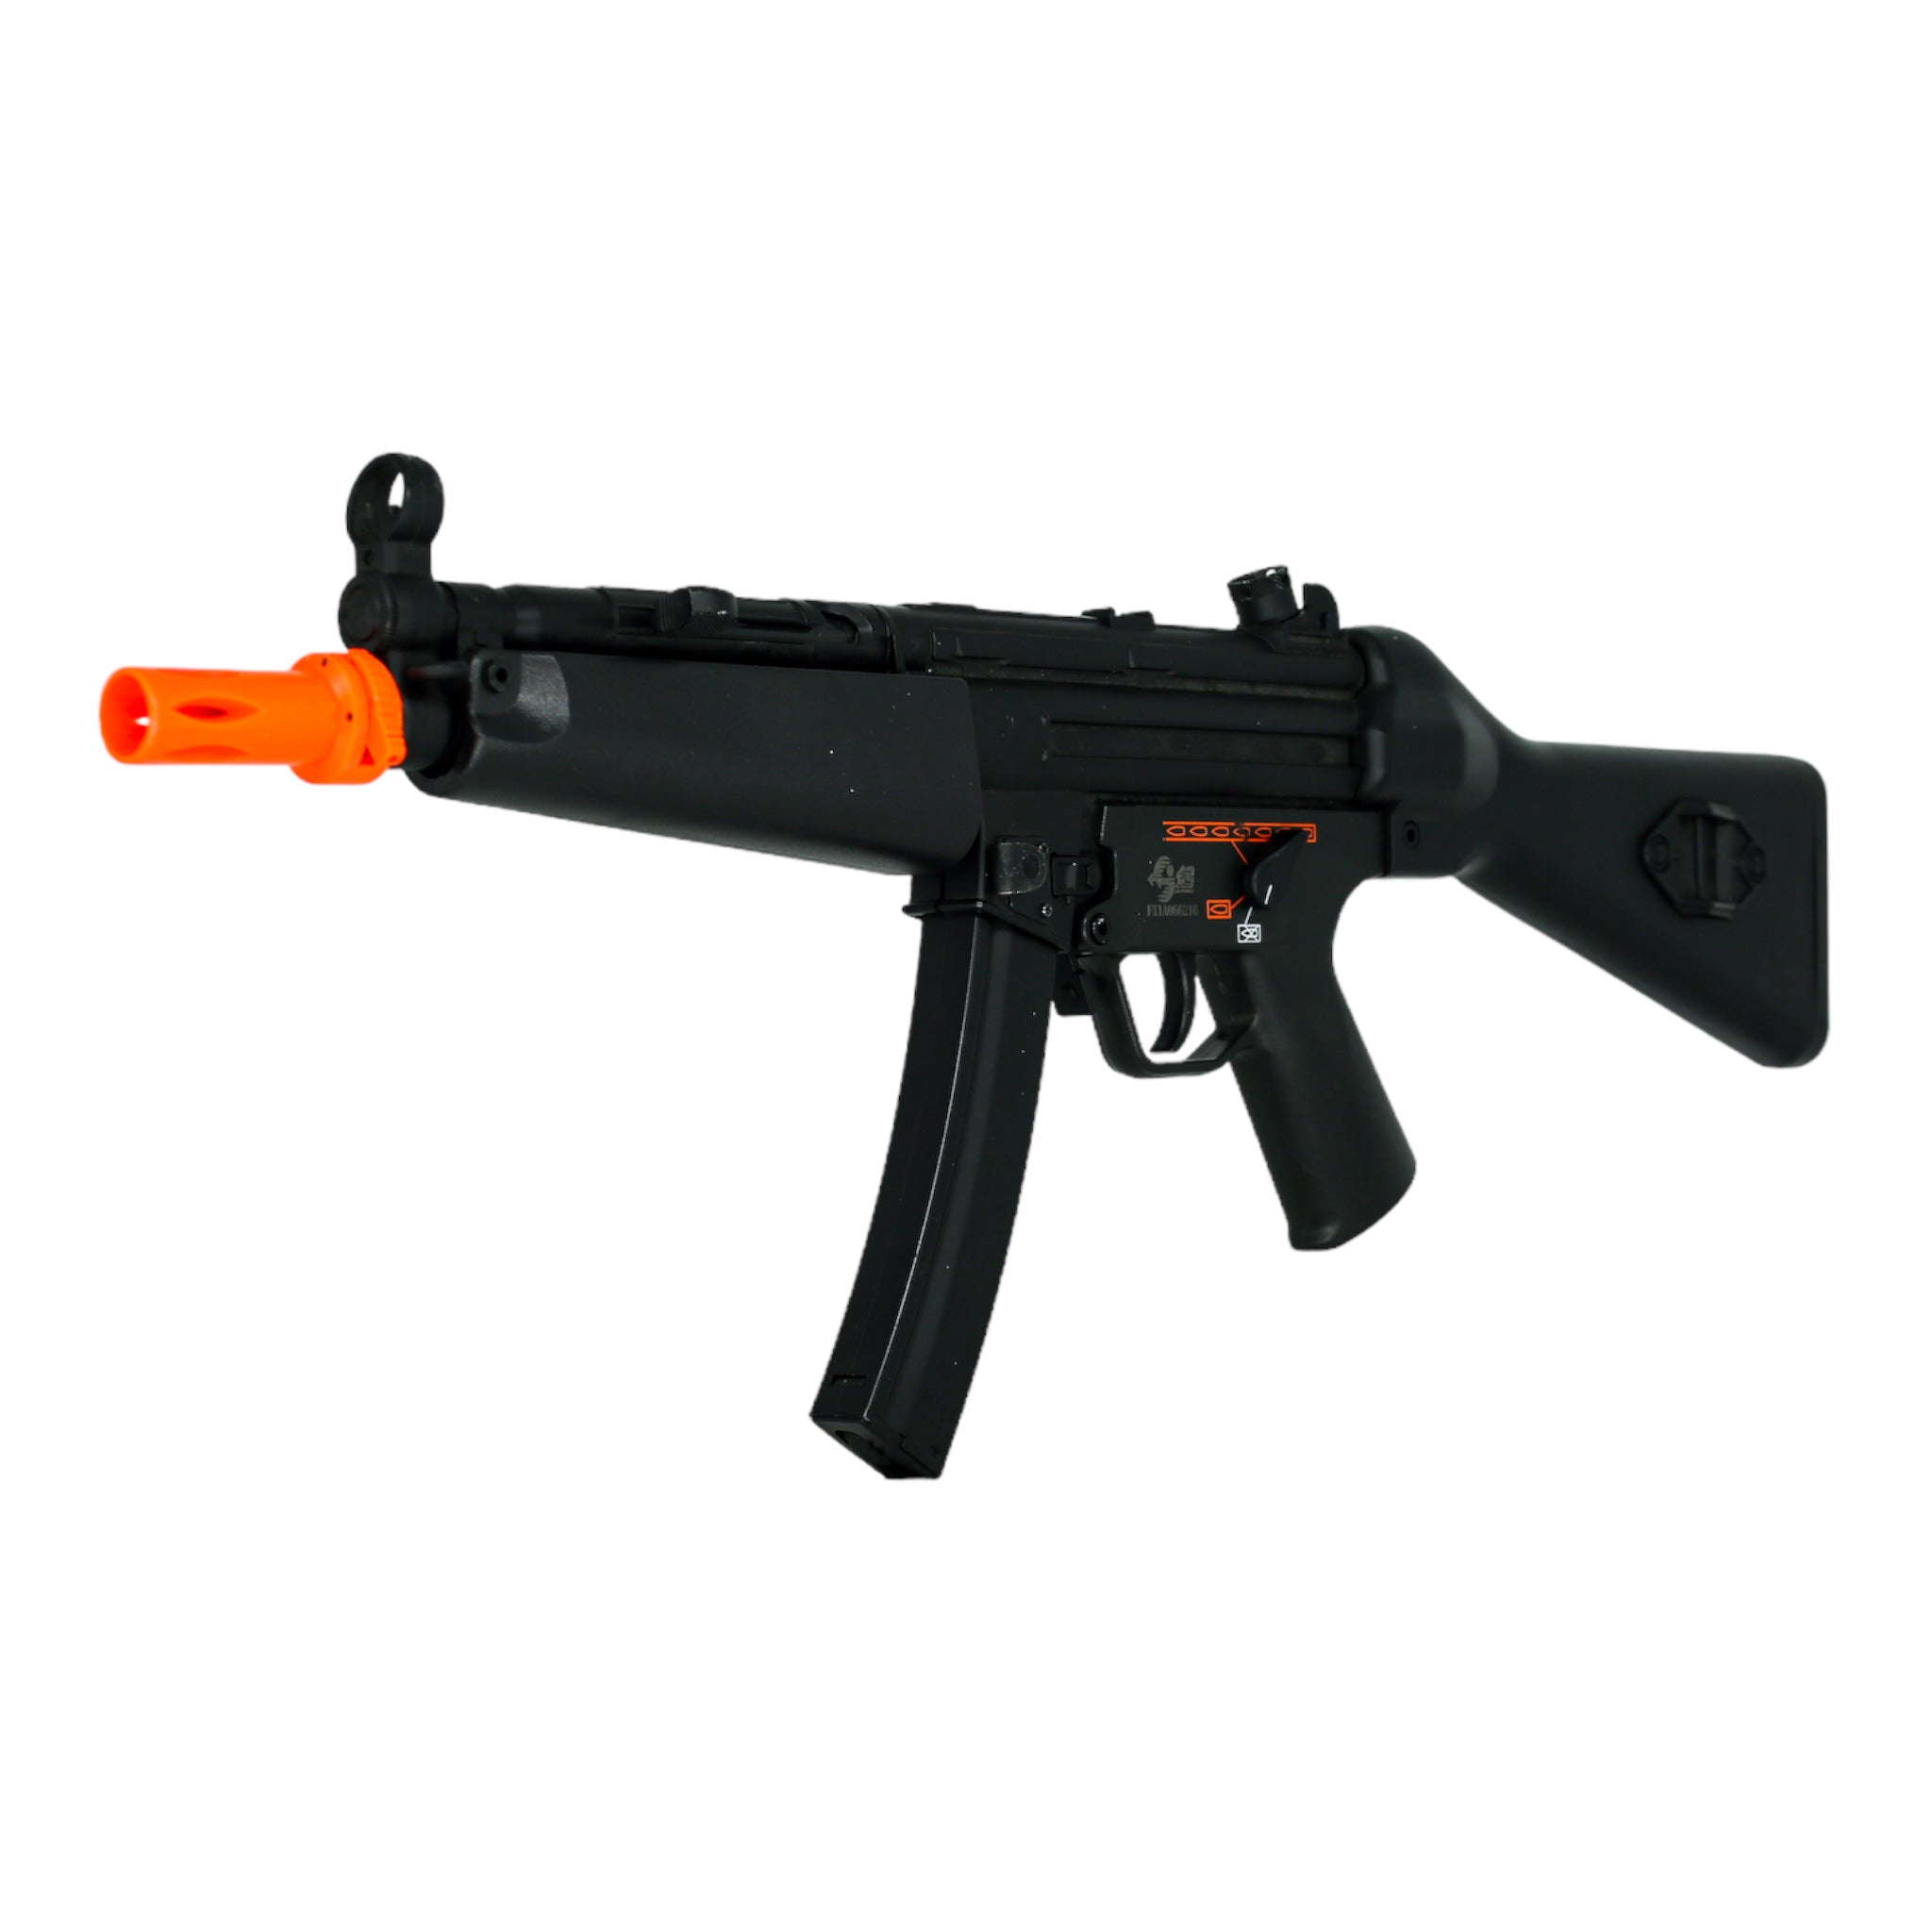 Pre-Owned JG MP5 w/ Battery - ssairsoft.com